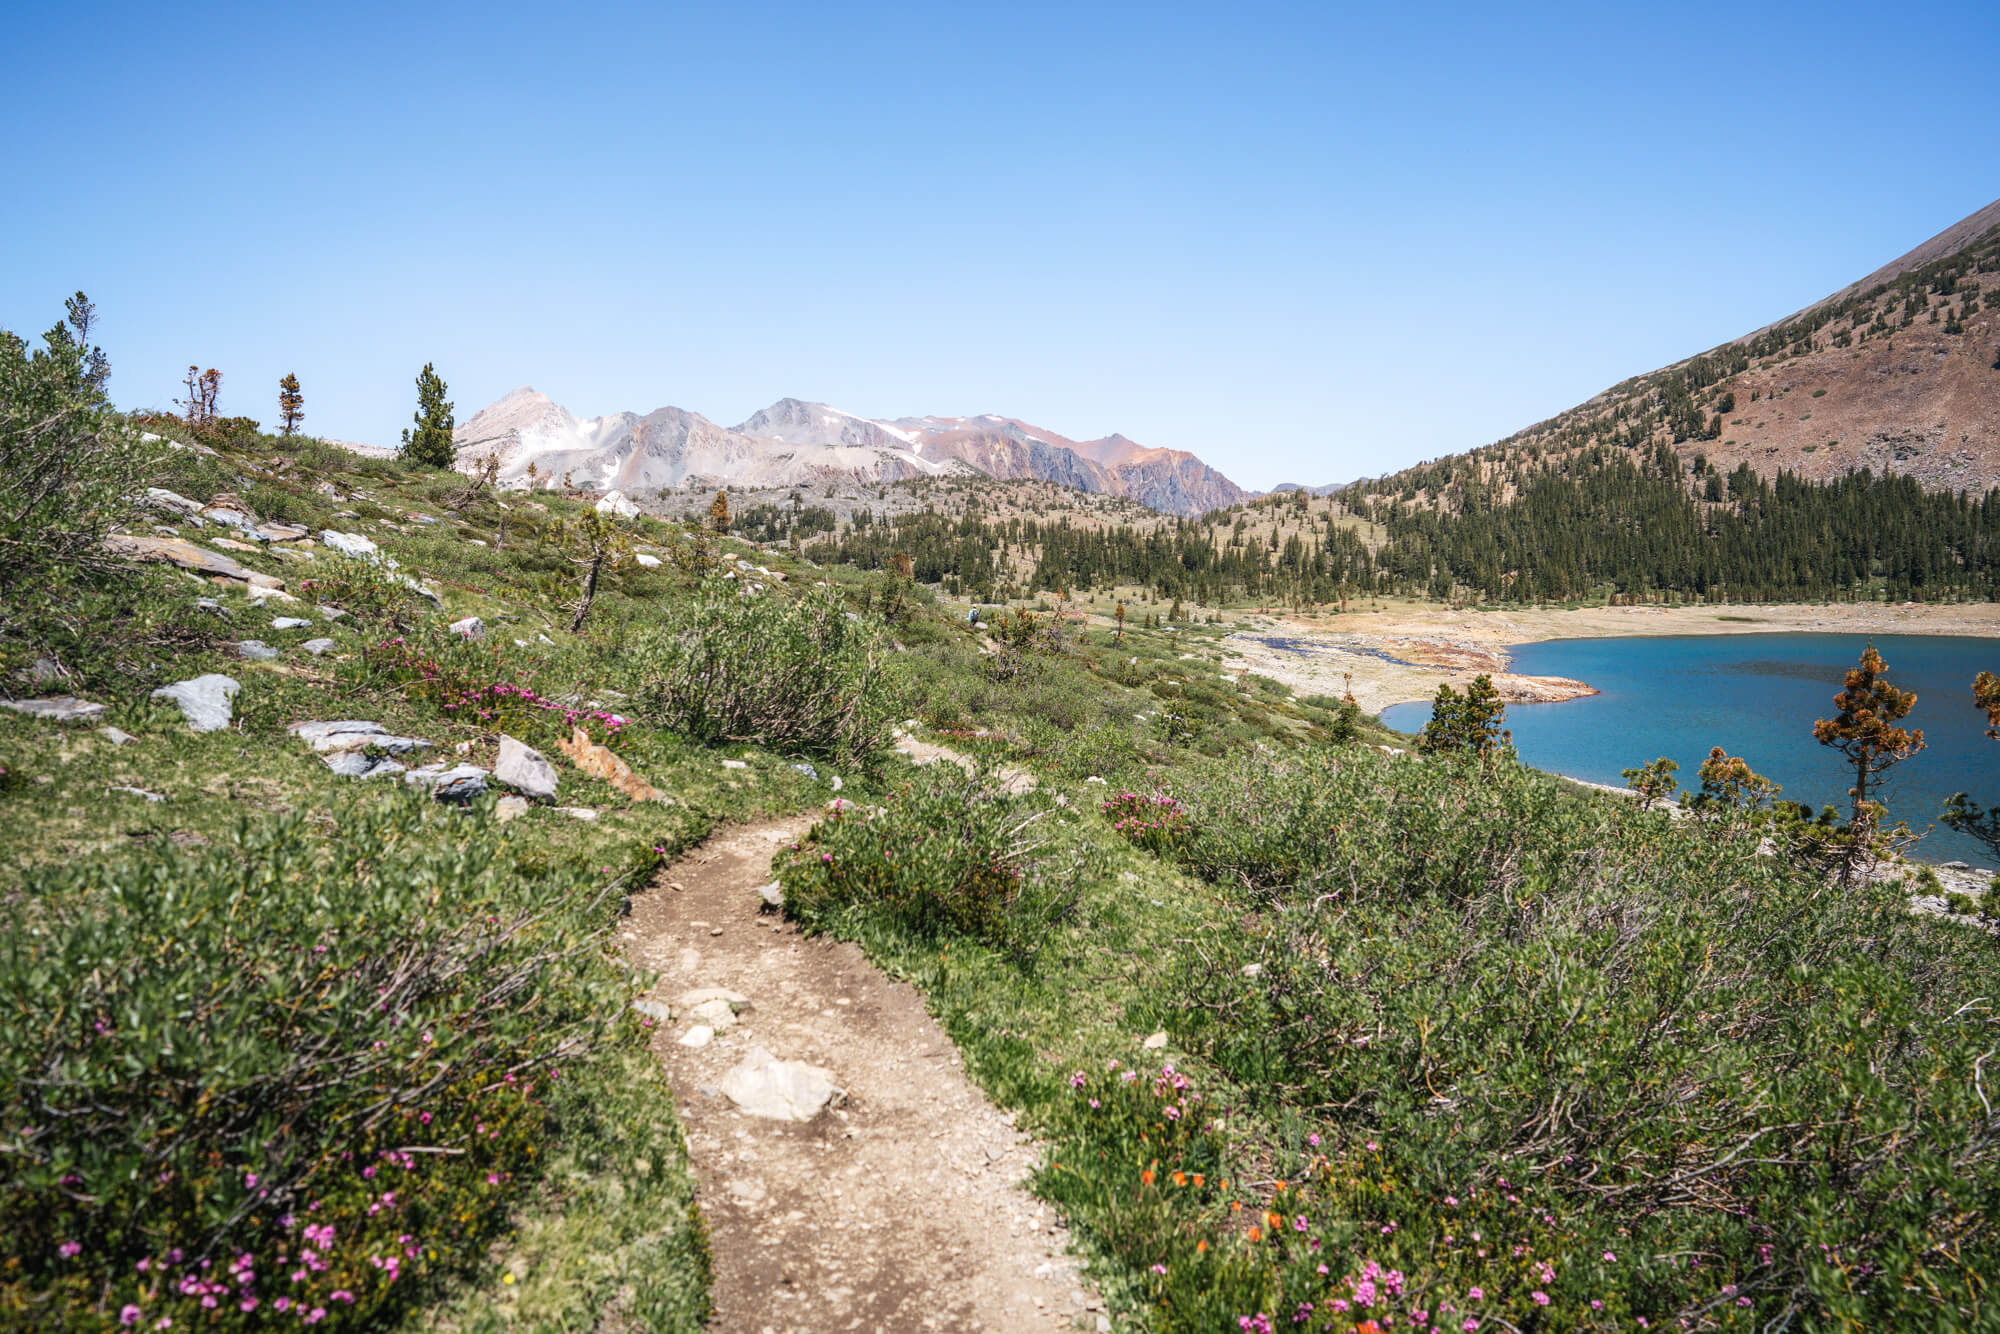 Saddlebag Lake trail turns from rocks to dirt at the end of the lake